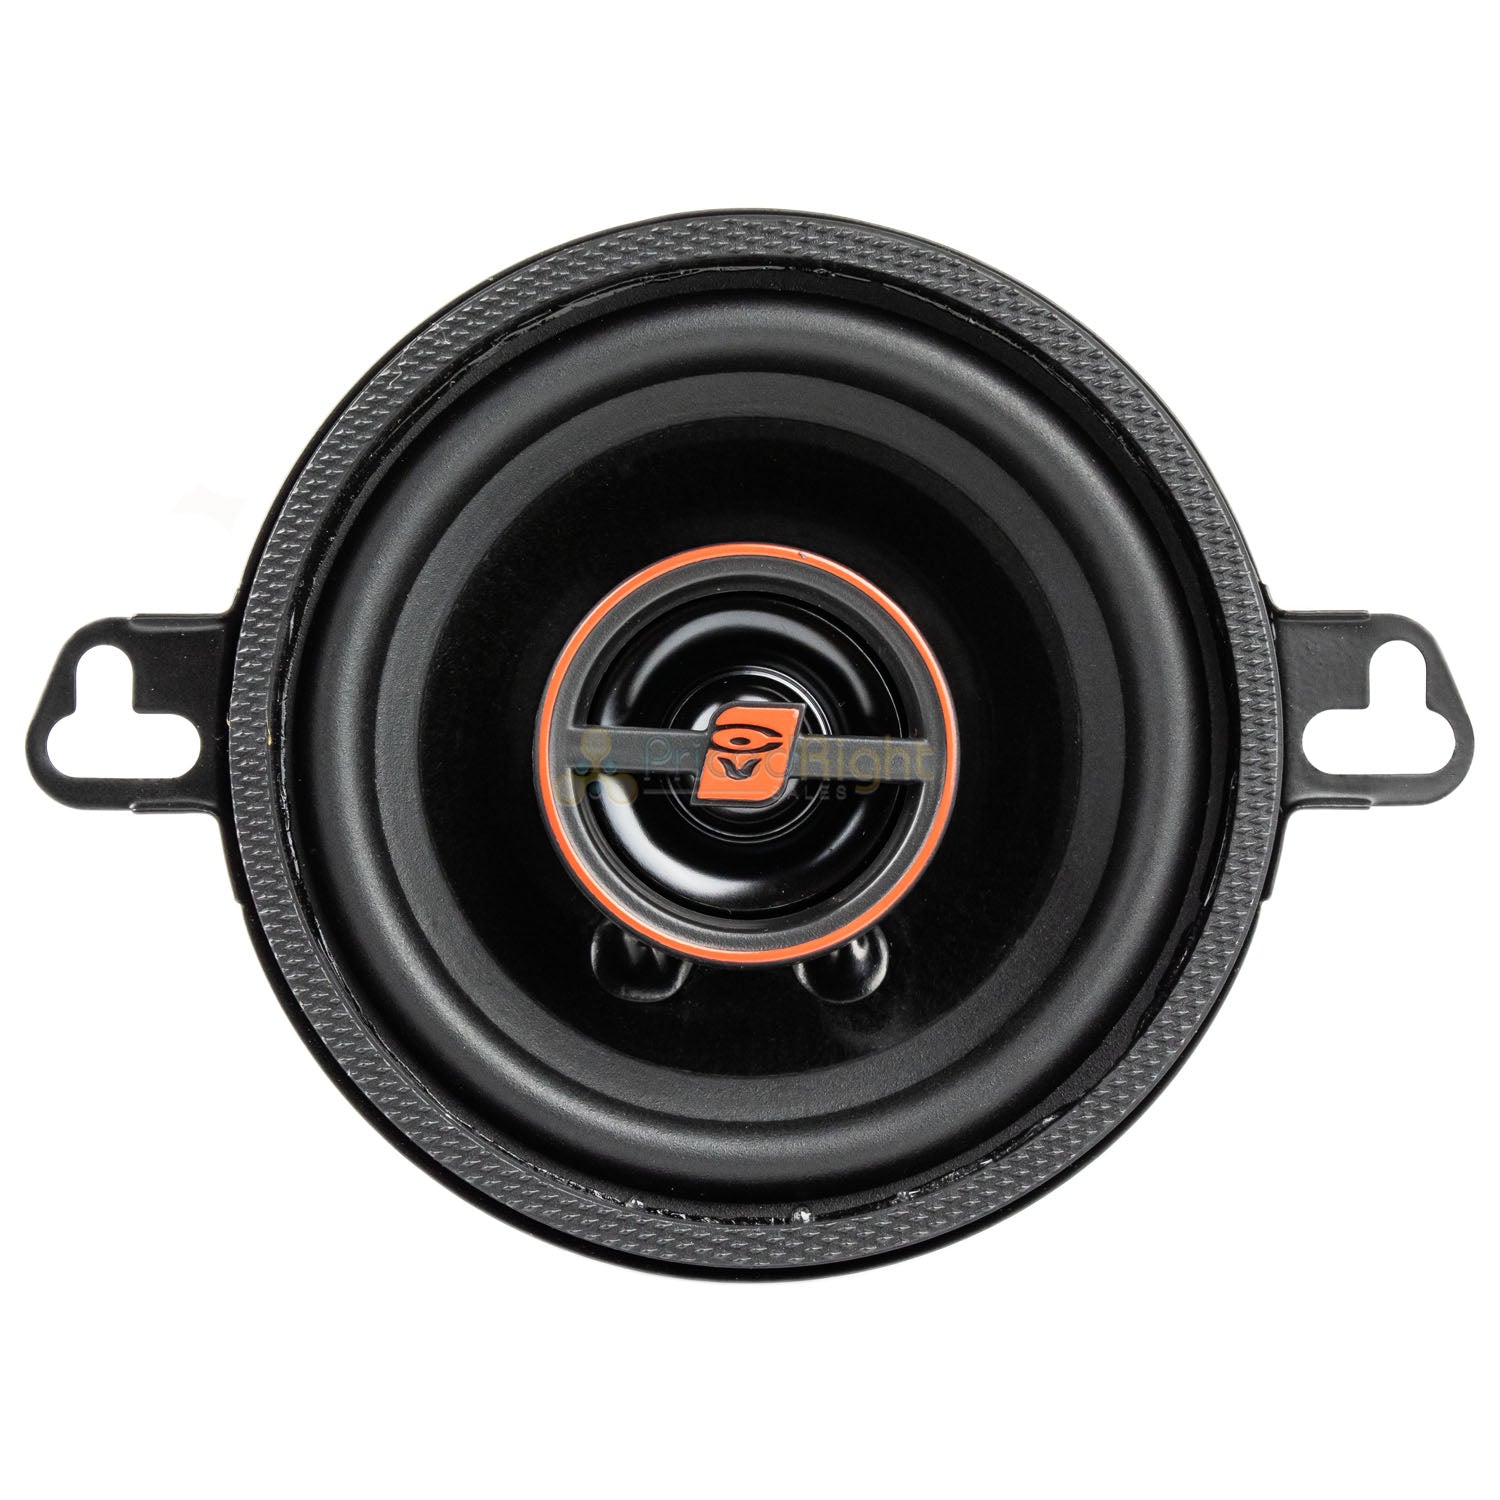 Cerwin Vega 3.5" 2 Way Coaxial Speakers Car Stereo Speakers HED Series 30W RMS